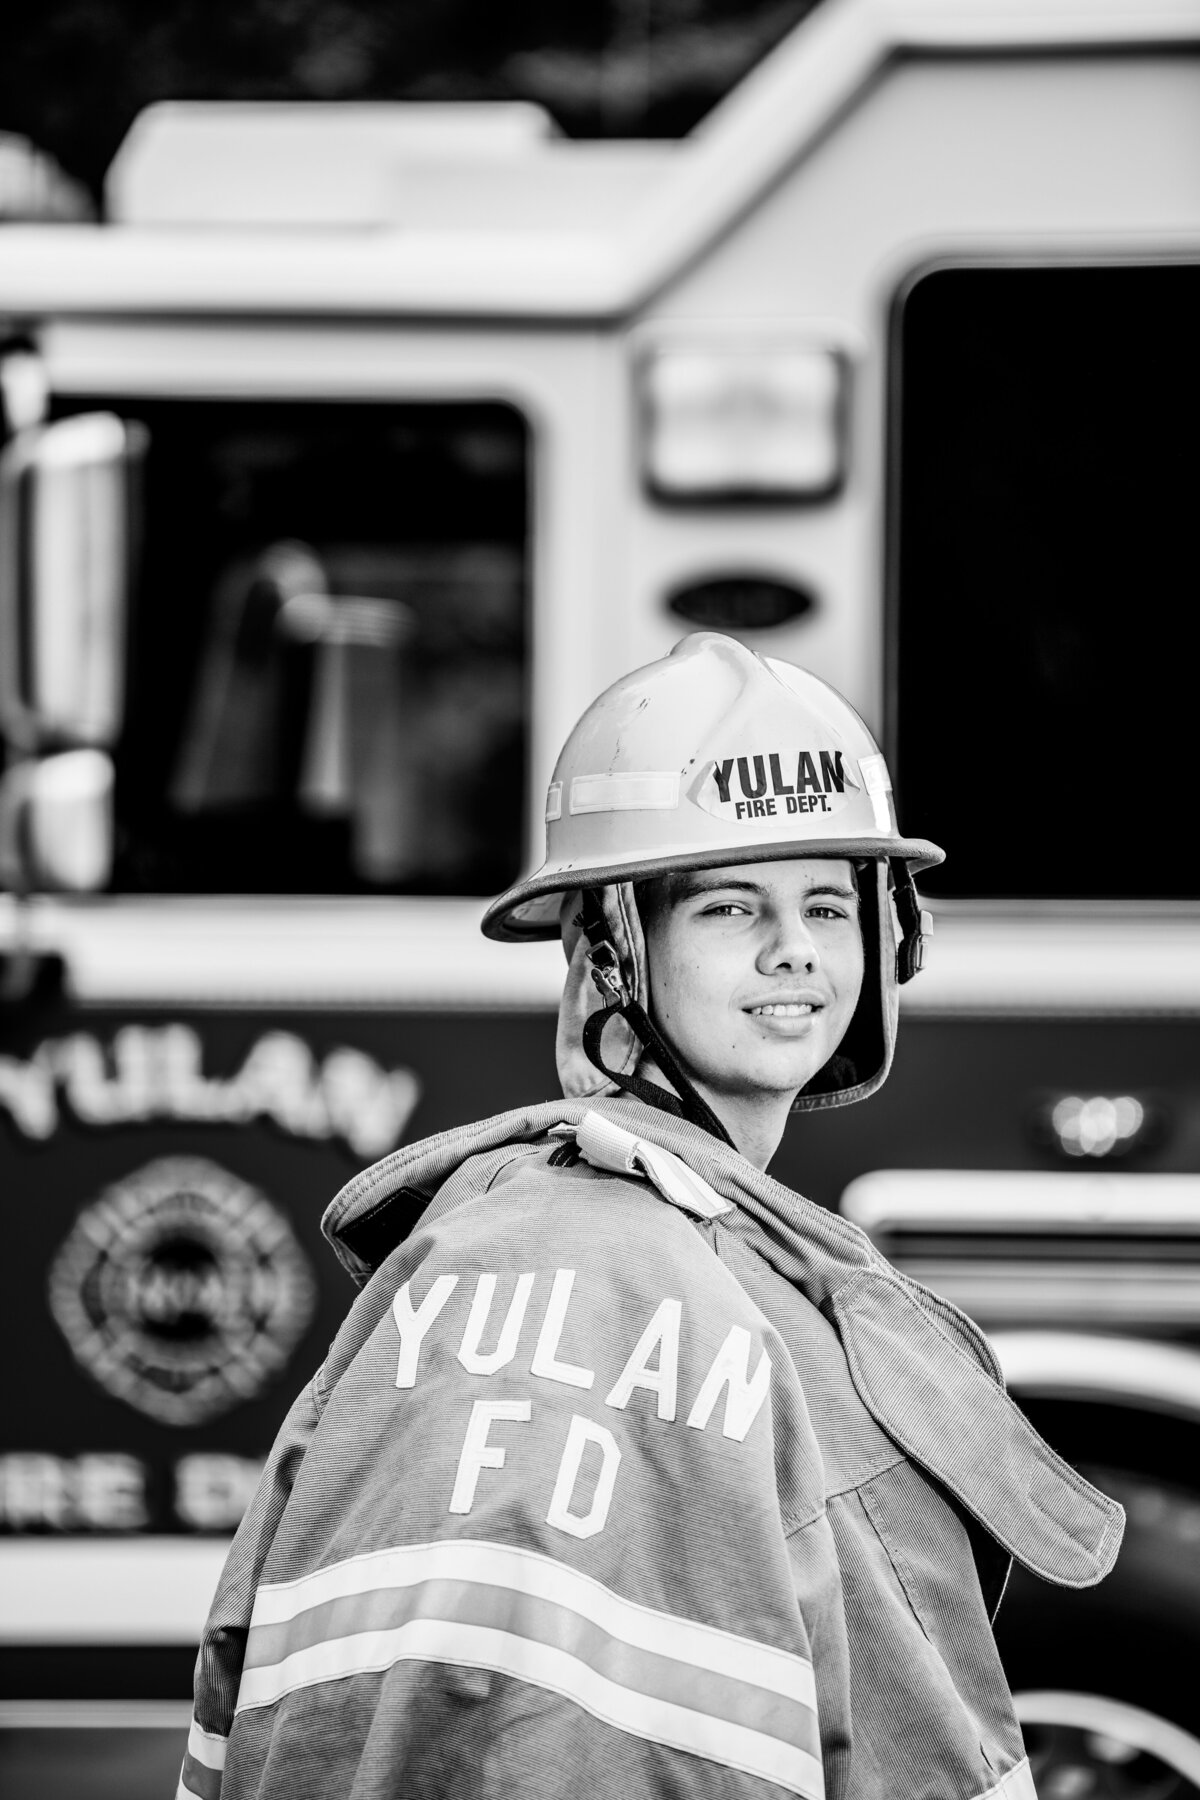 a yulan new york firefighter wears his turnout gear while standing in front of a yulan firetruck